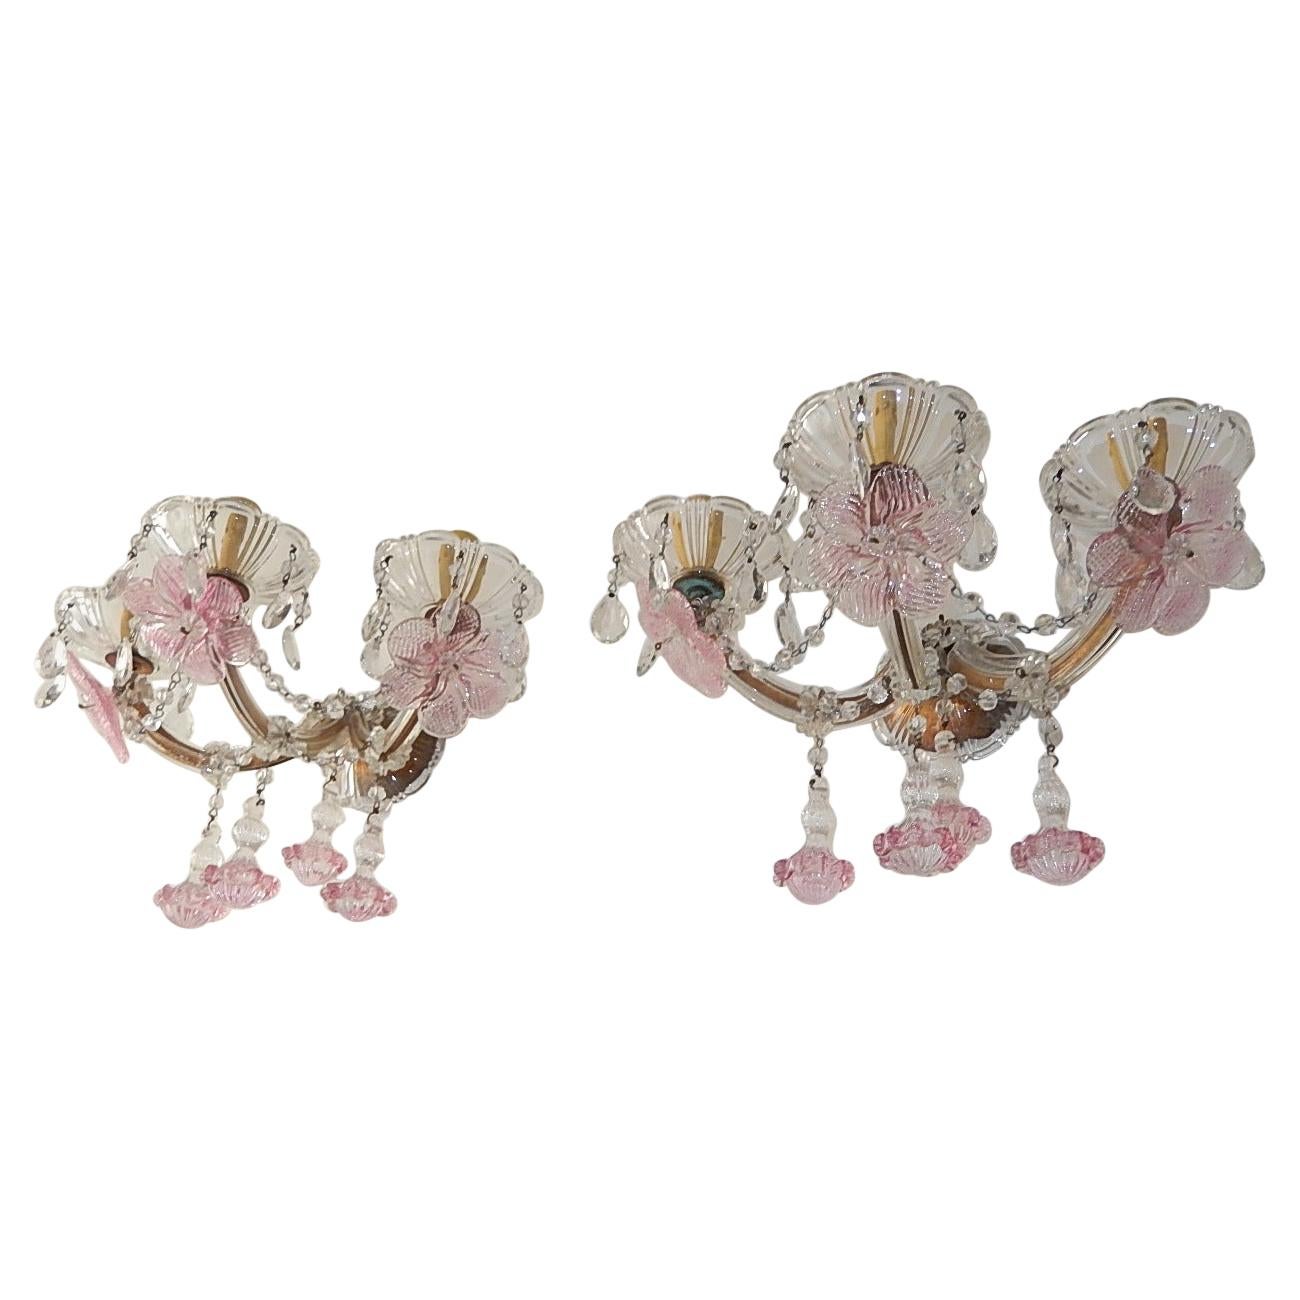 1920 French Fuchsia Murano Flowers, Drops and Crystal Prisms 3-Light Sconces